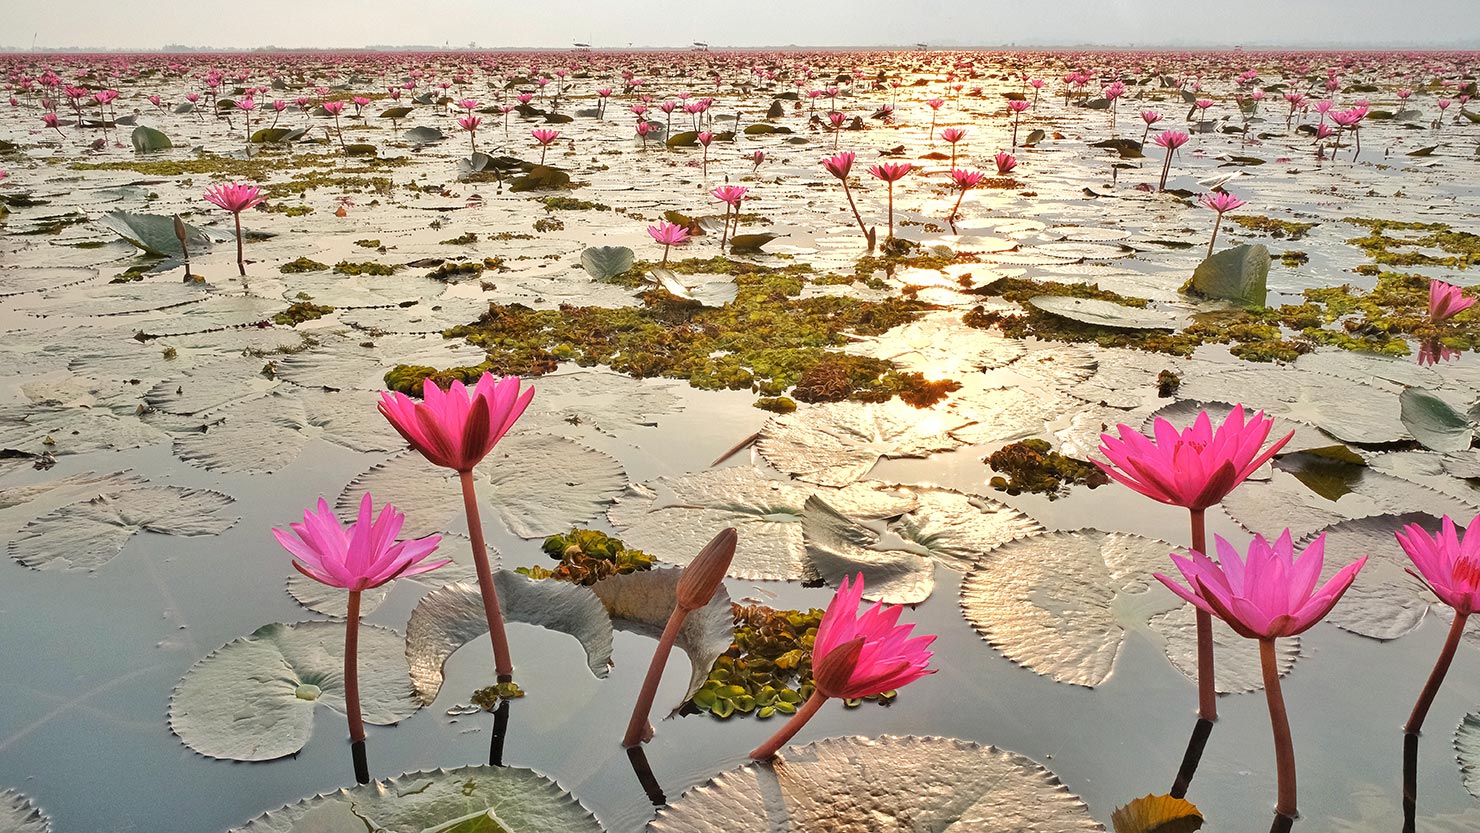 Lilies at Red Lotus Lake in Udon Thani Thailand during the golden hour just after sunrise